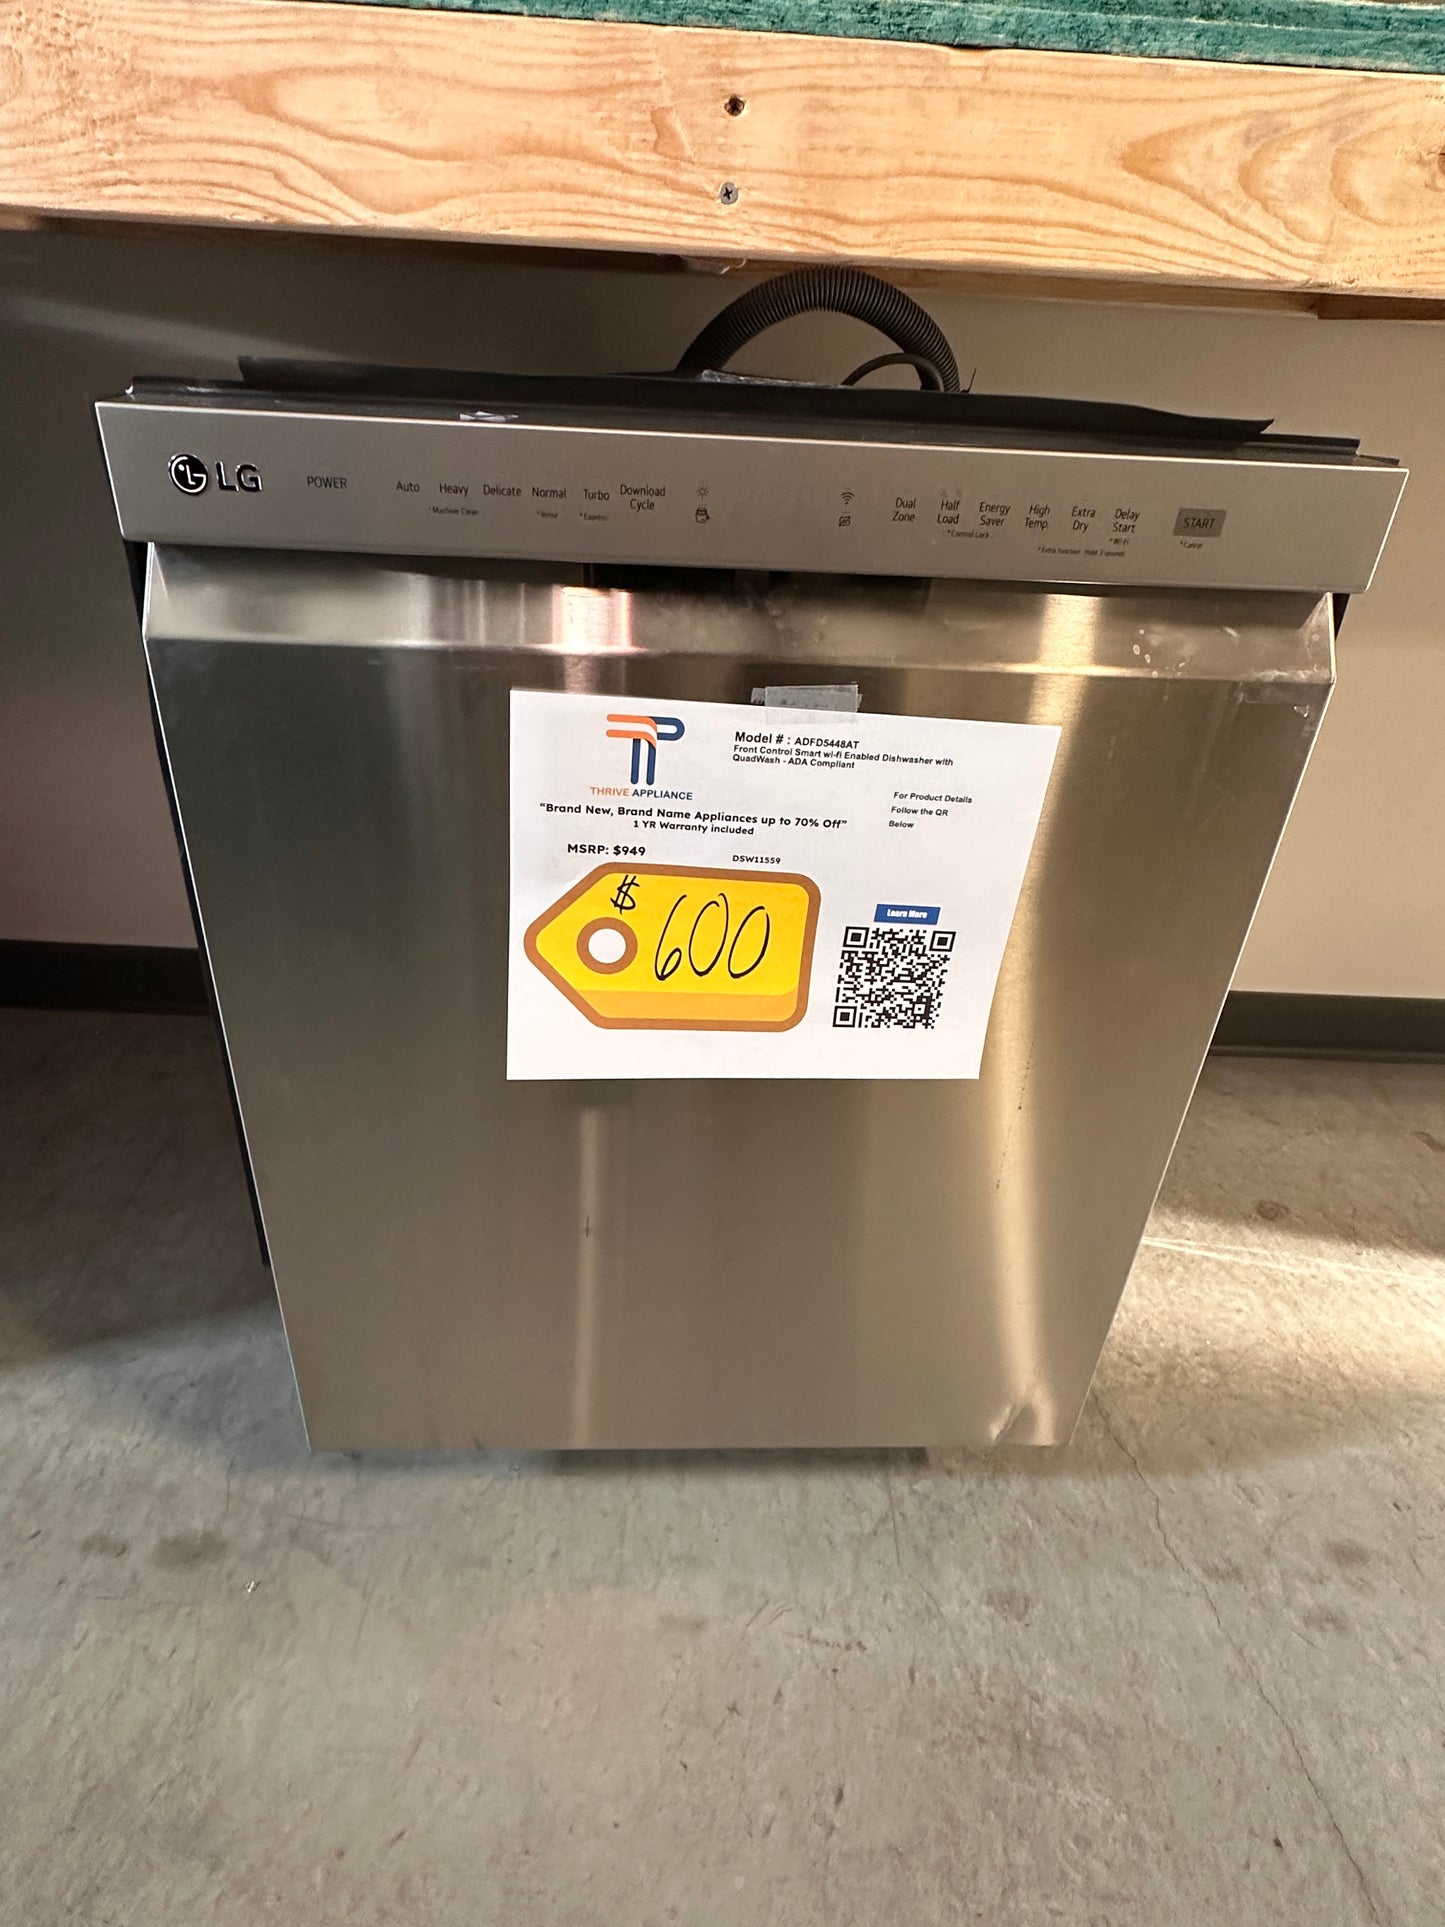 LG DISHWASHER with STAINLESS STEEL TUB and QUADWASH - DSW11559 - ADFD5448AT